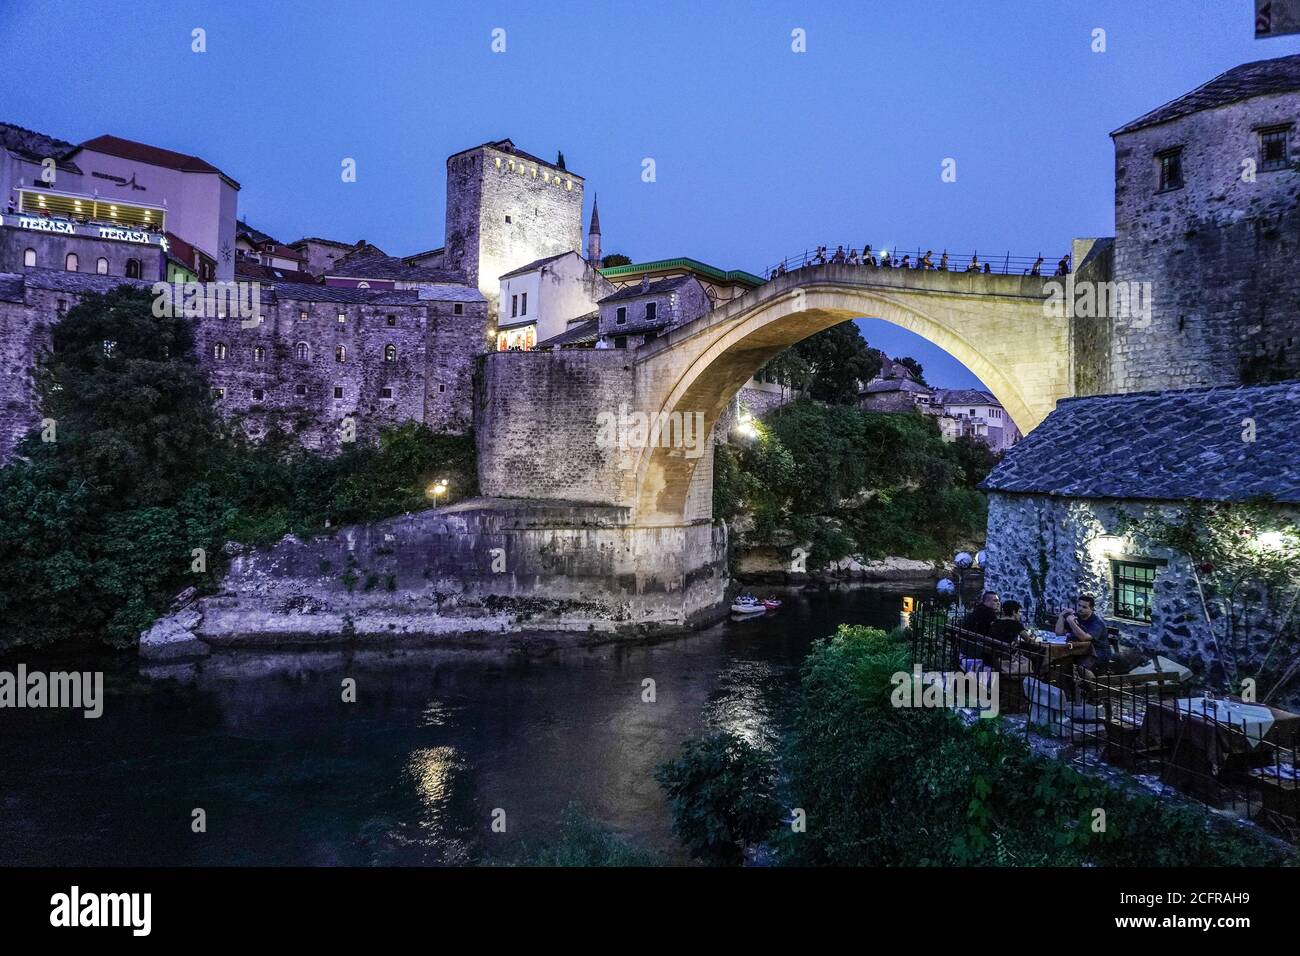 Bosnia-Herzegovina: Mostar. The old townat dusk and its famous bridge over the Neretva River, district registered as a UNESCO World Heritage Site. Tou Stock Photo